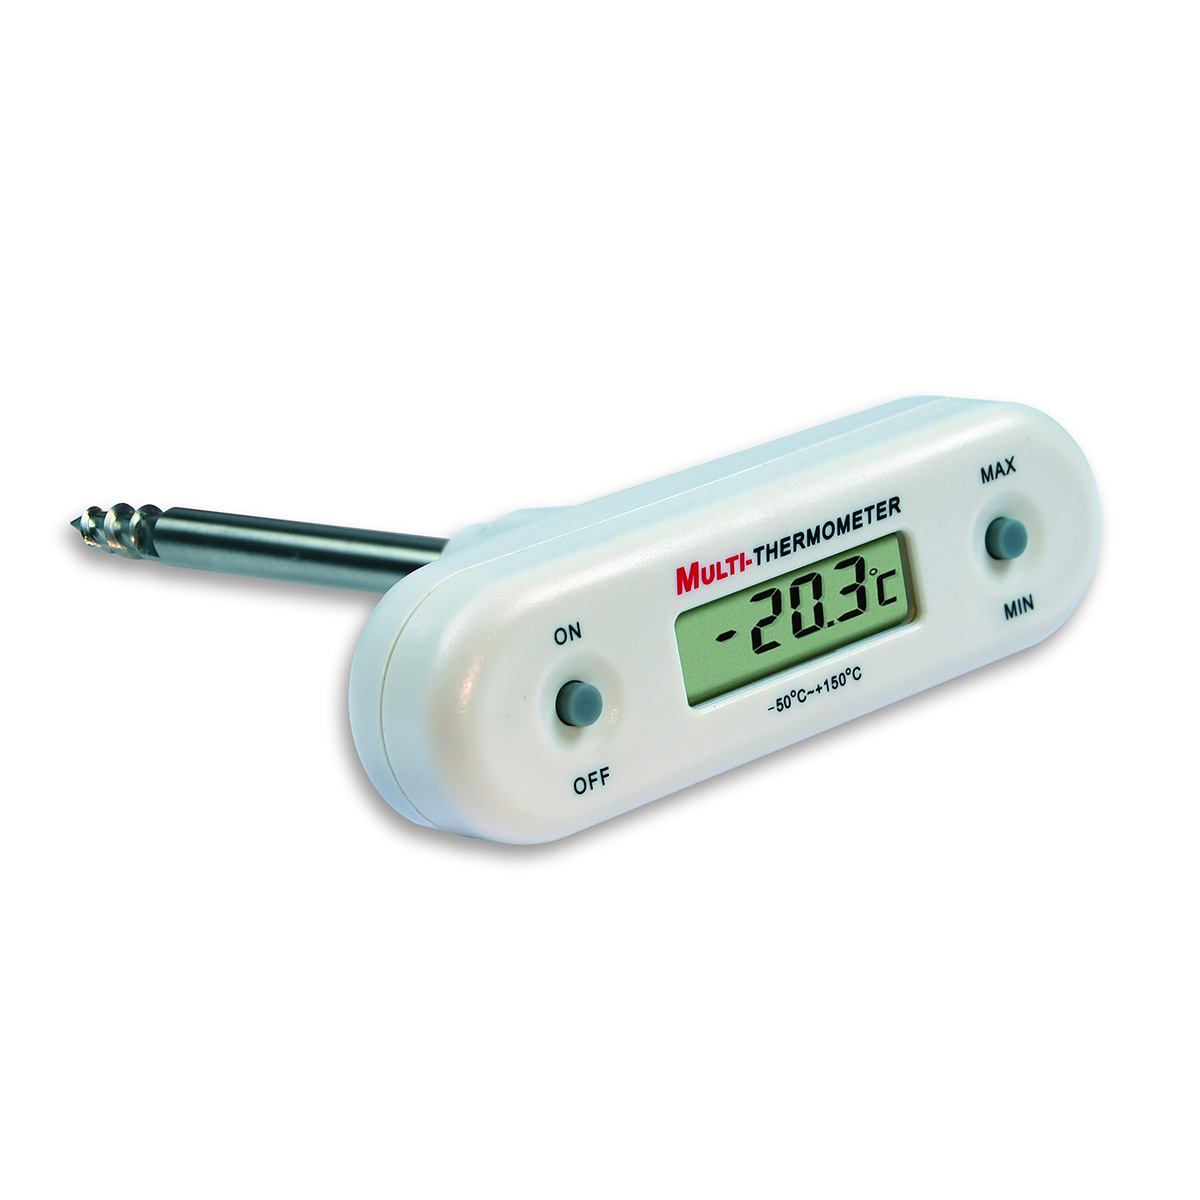 Digital T-Shaped Corkscrew Tip Thermometer for Frozen Food